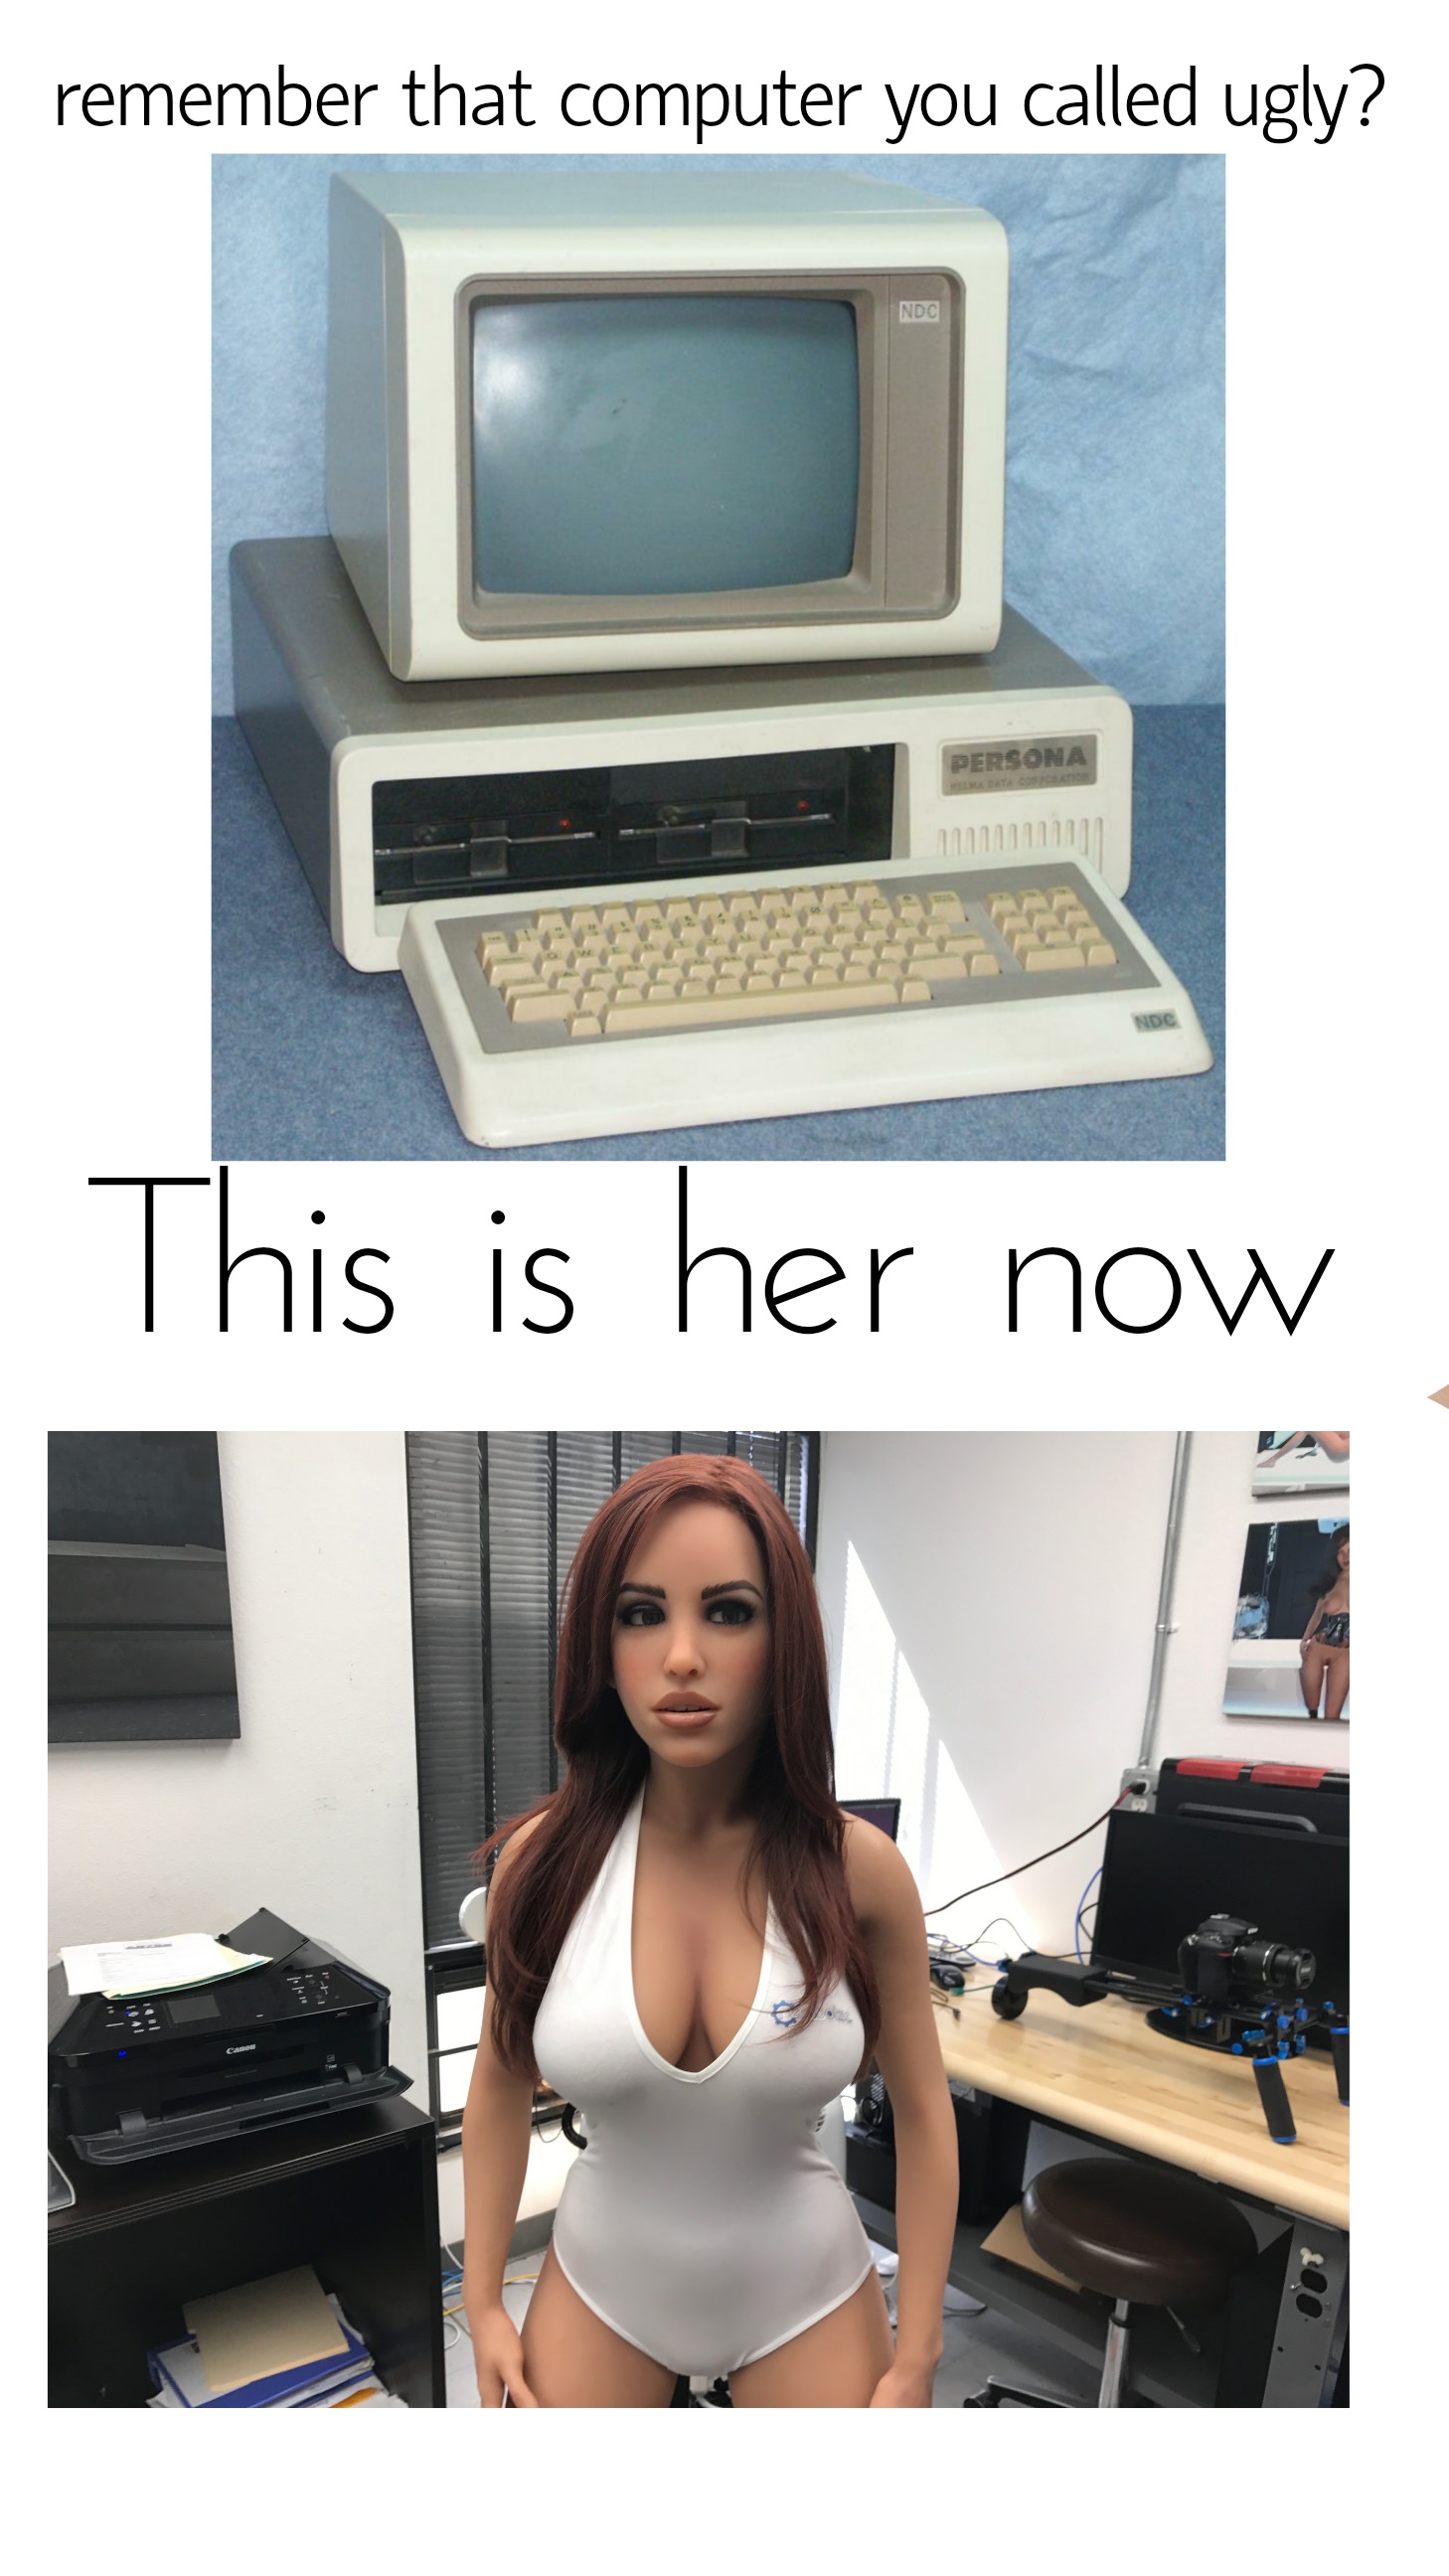 ugly computer - remember that computer you called ugly? This is her now